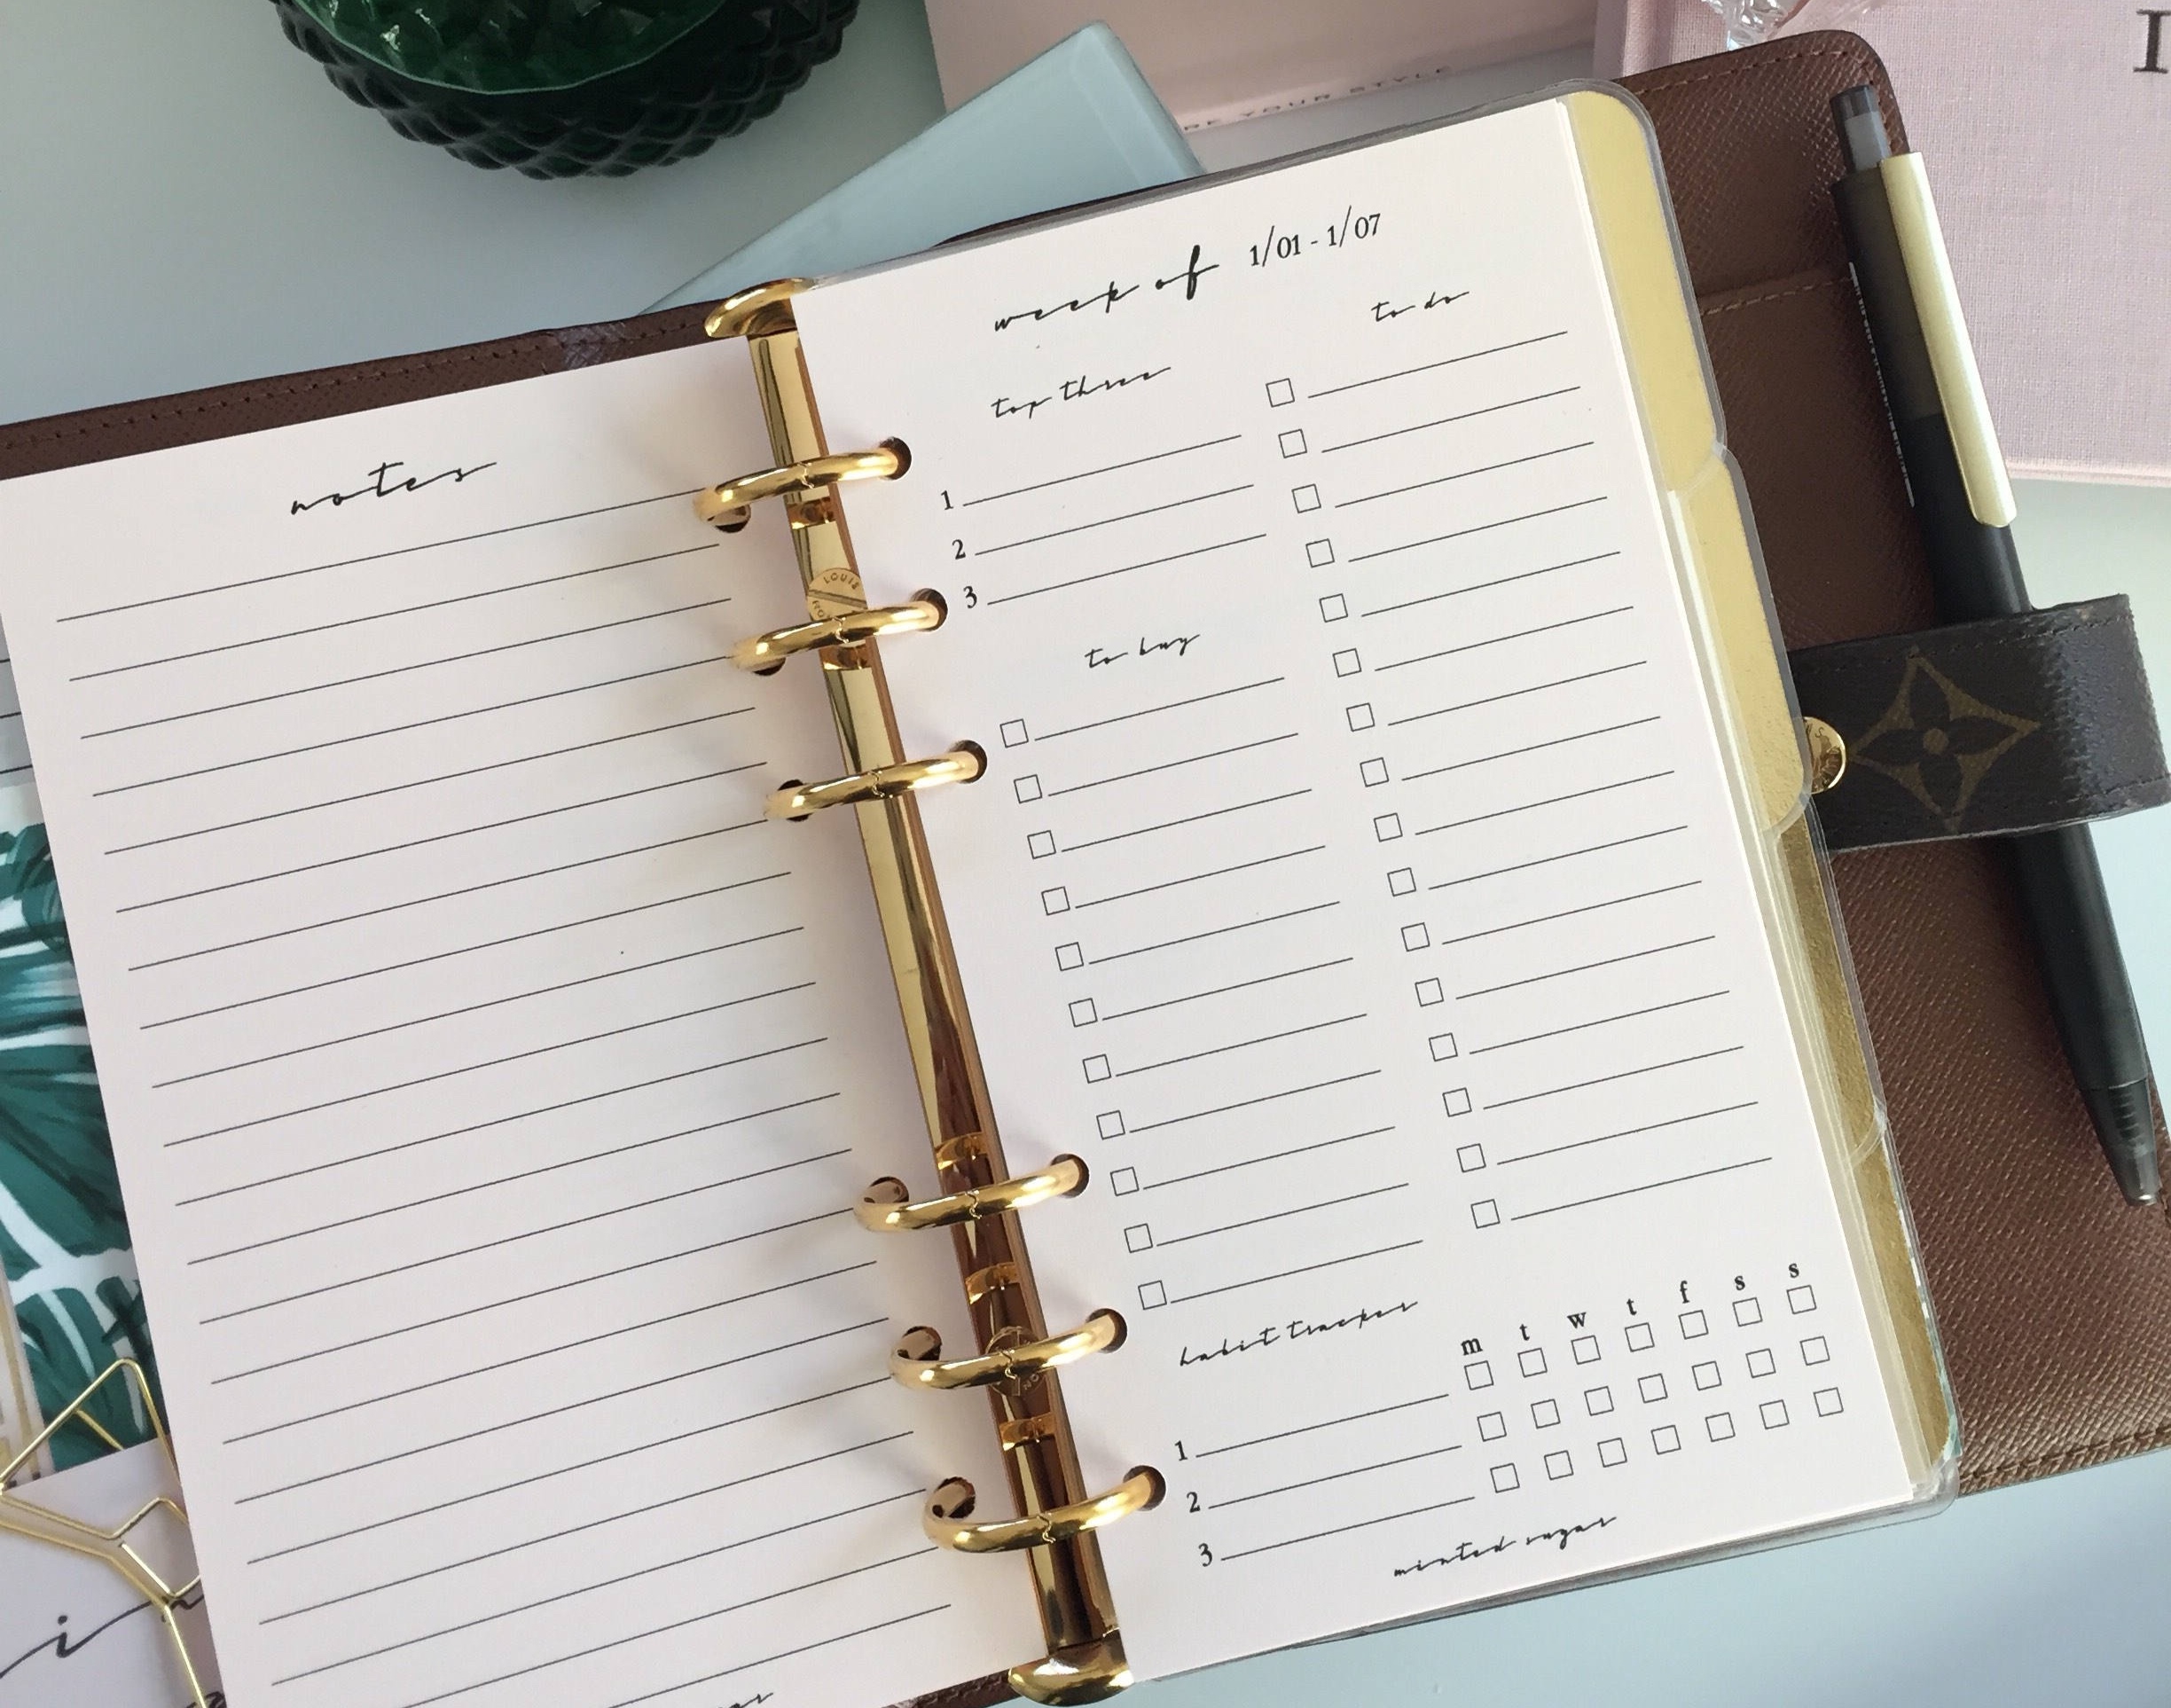 2019 Goal Planning- How to Set Goals & Achieve Them — Beauty and Etc.